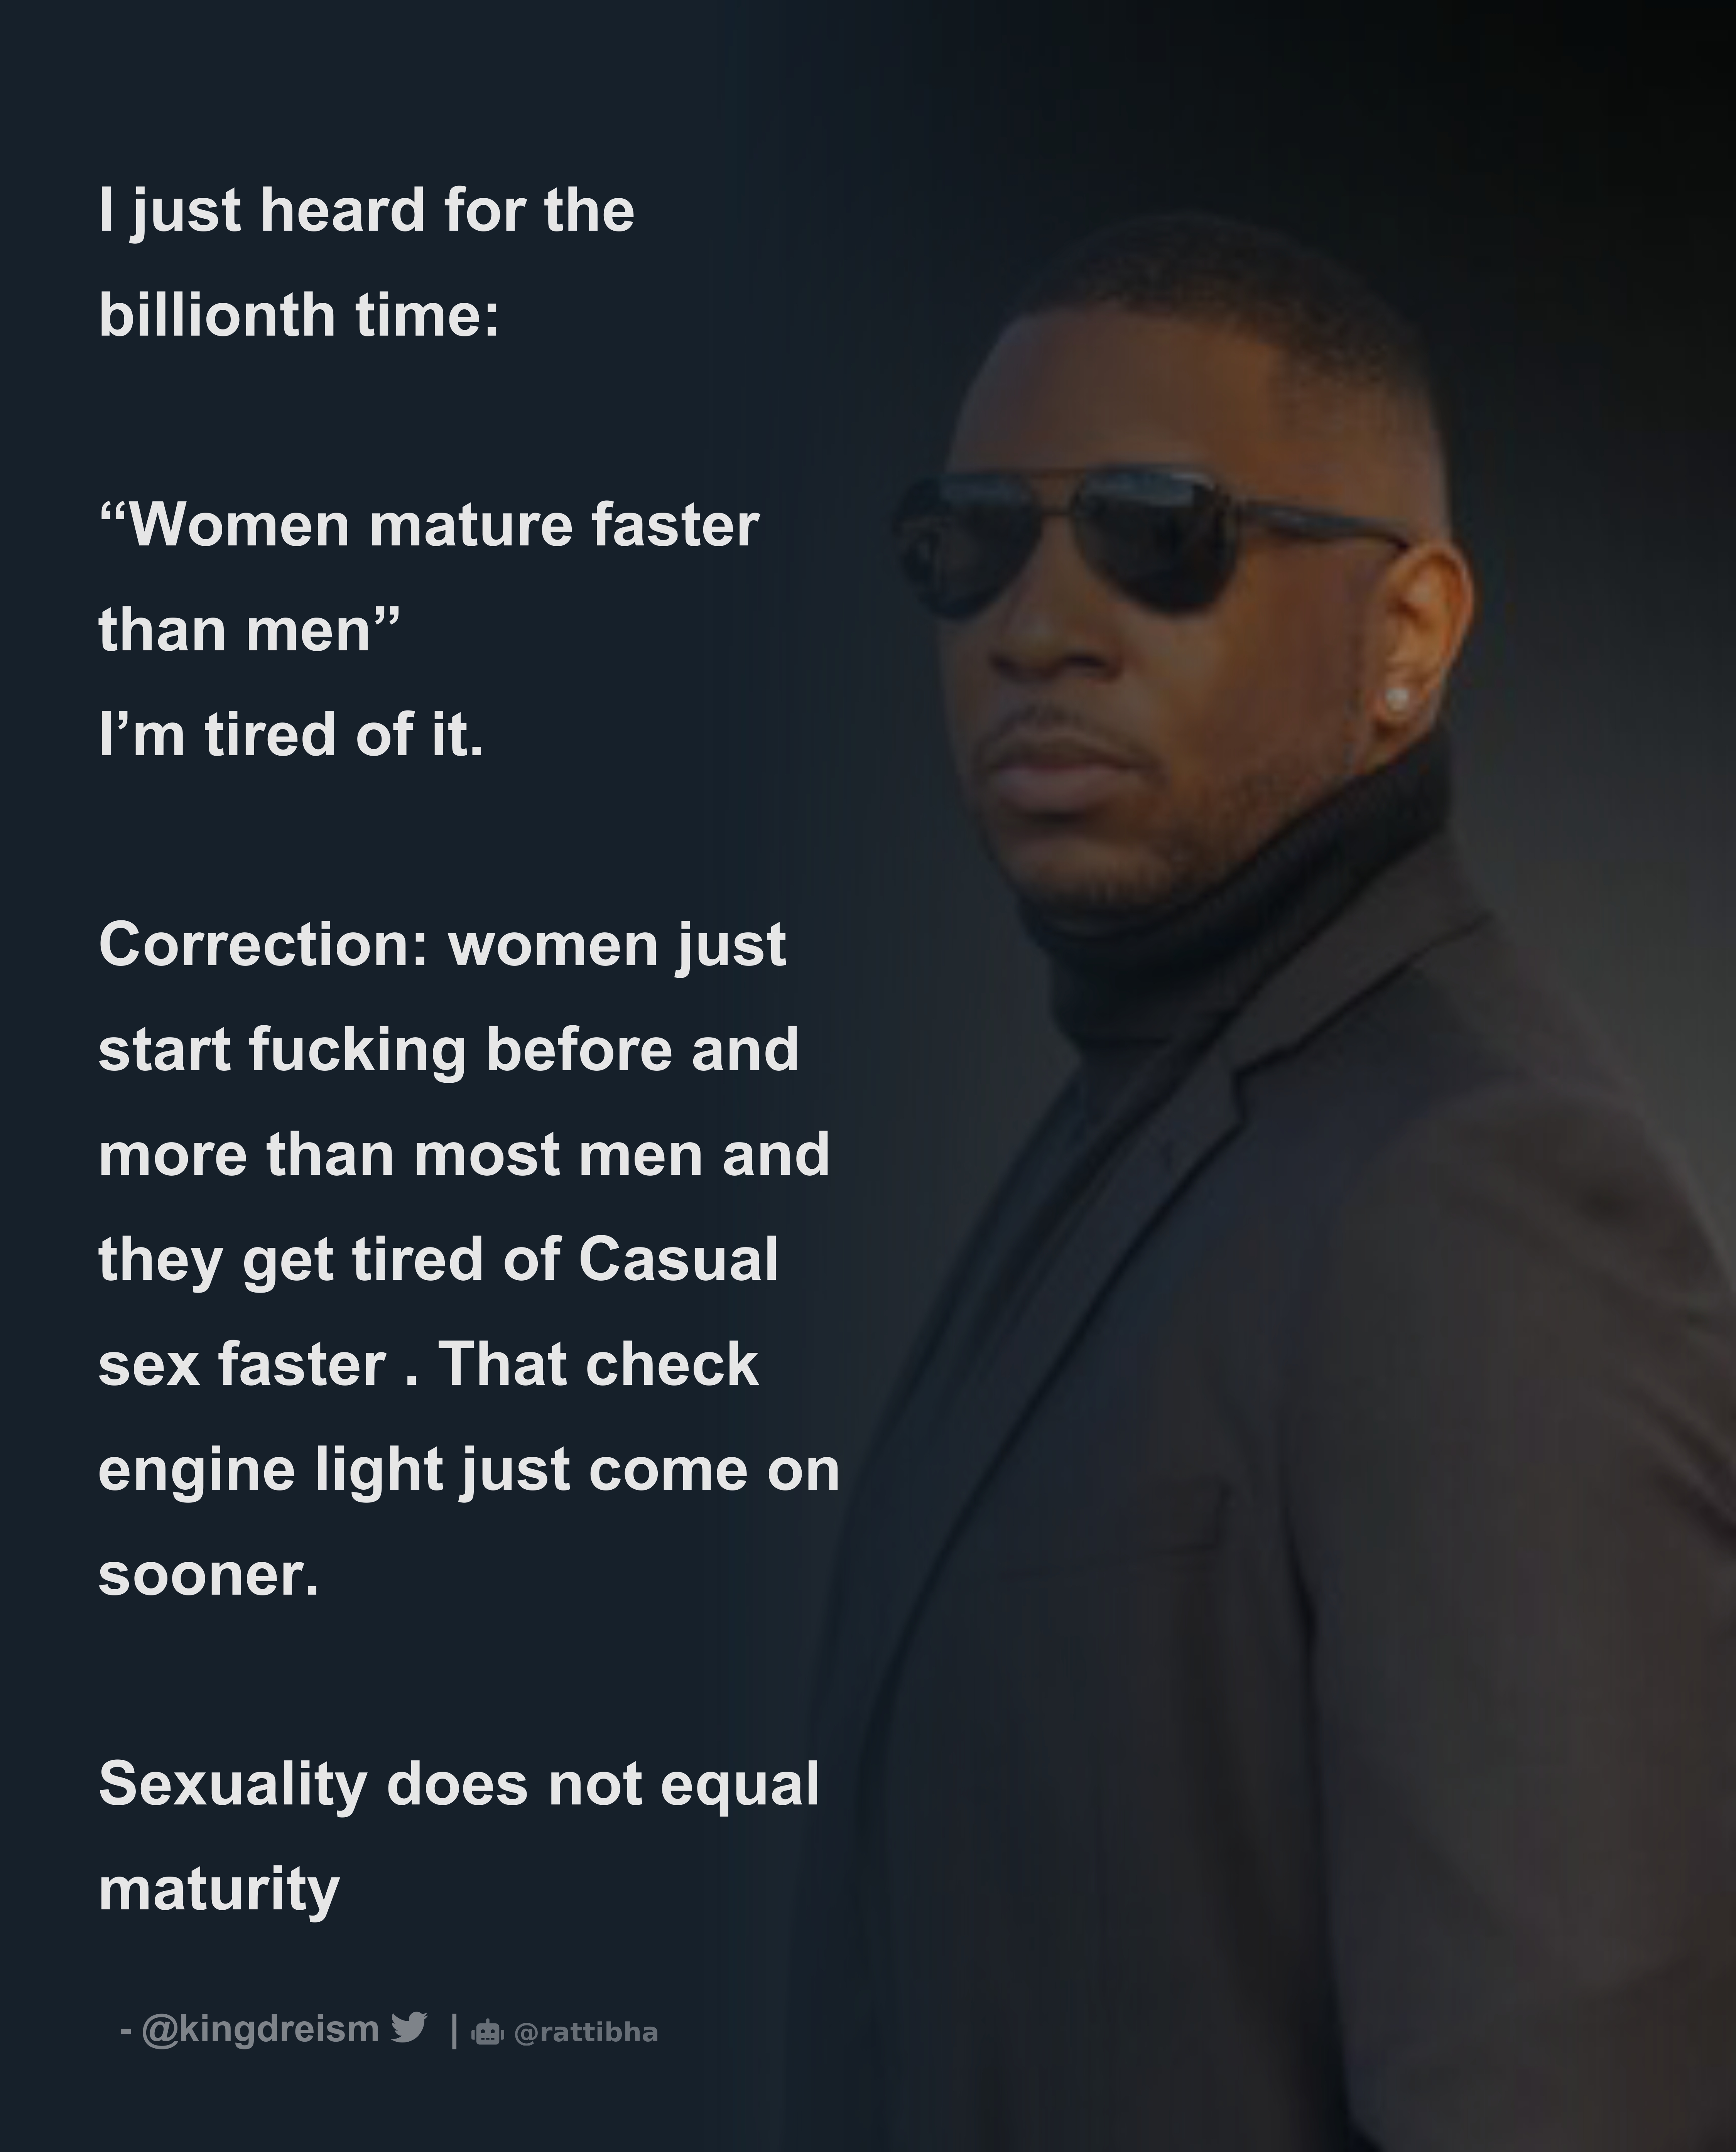 I just heard for the billionth time “Women mature faster than men” Im tired of it image picture